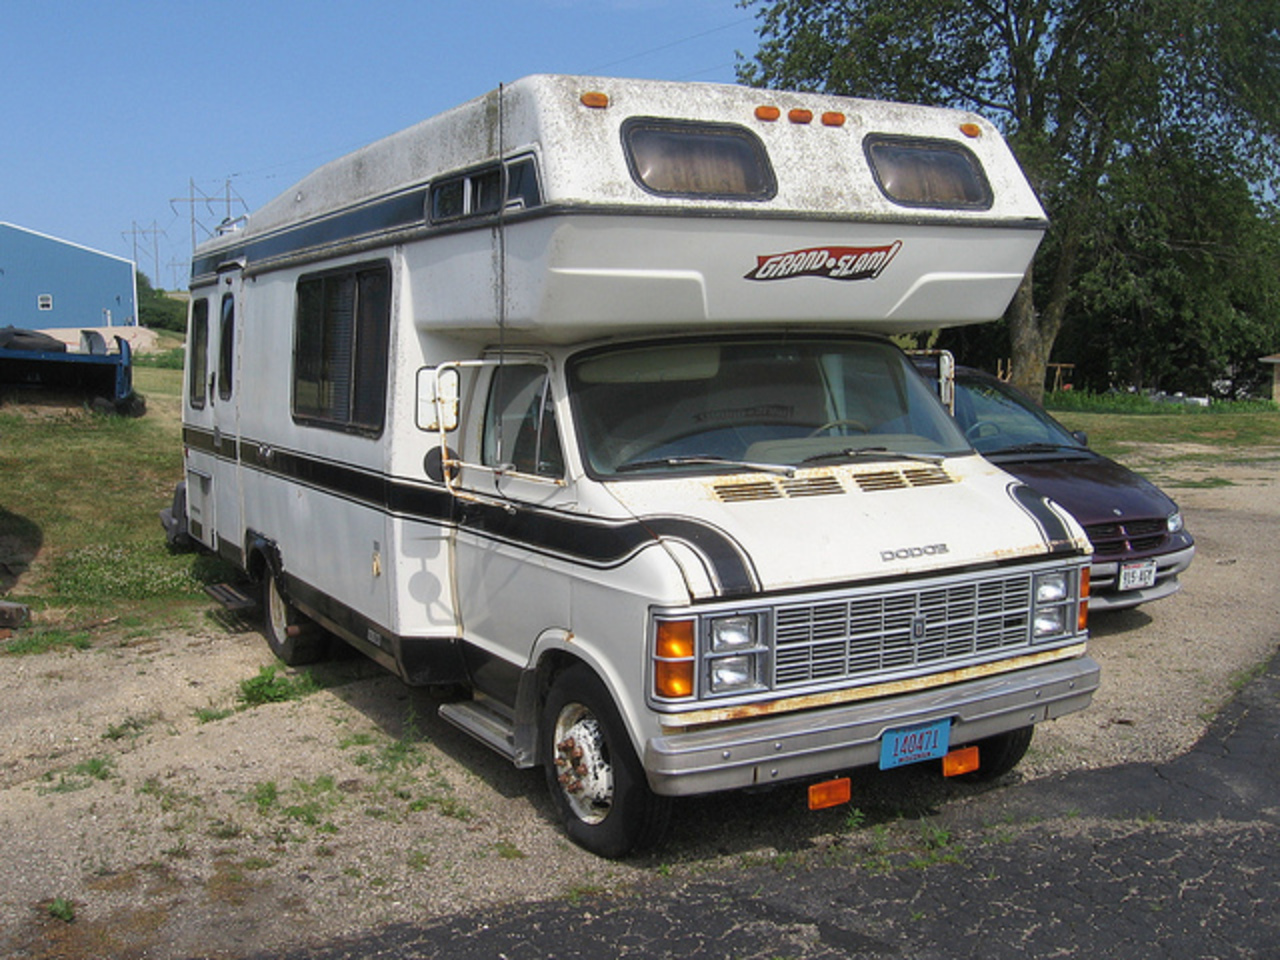 1979 Dodge camper. An older vehicle plucked down in the back of the lot.